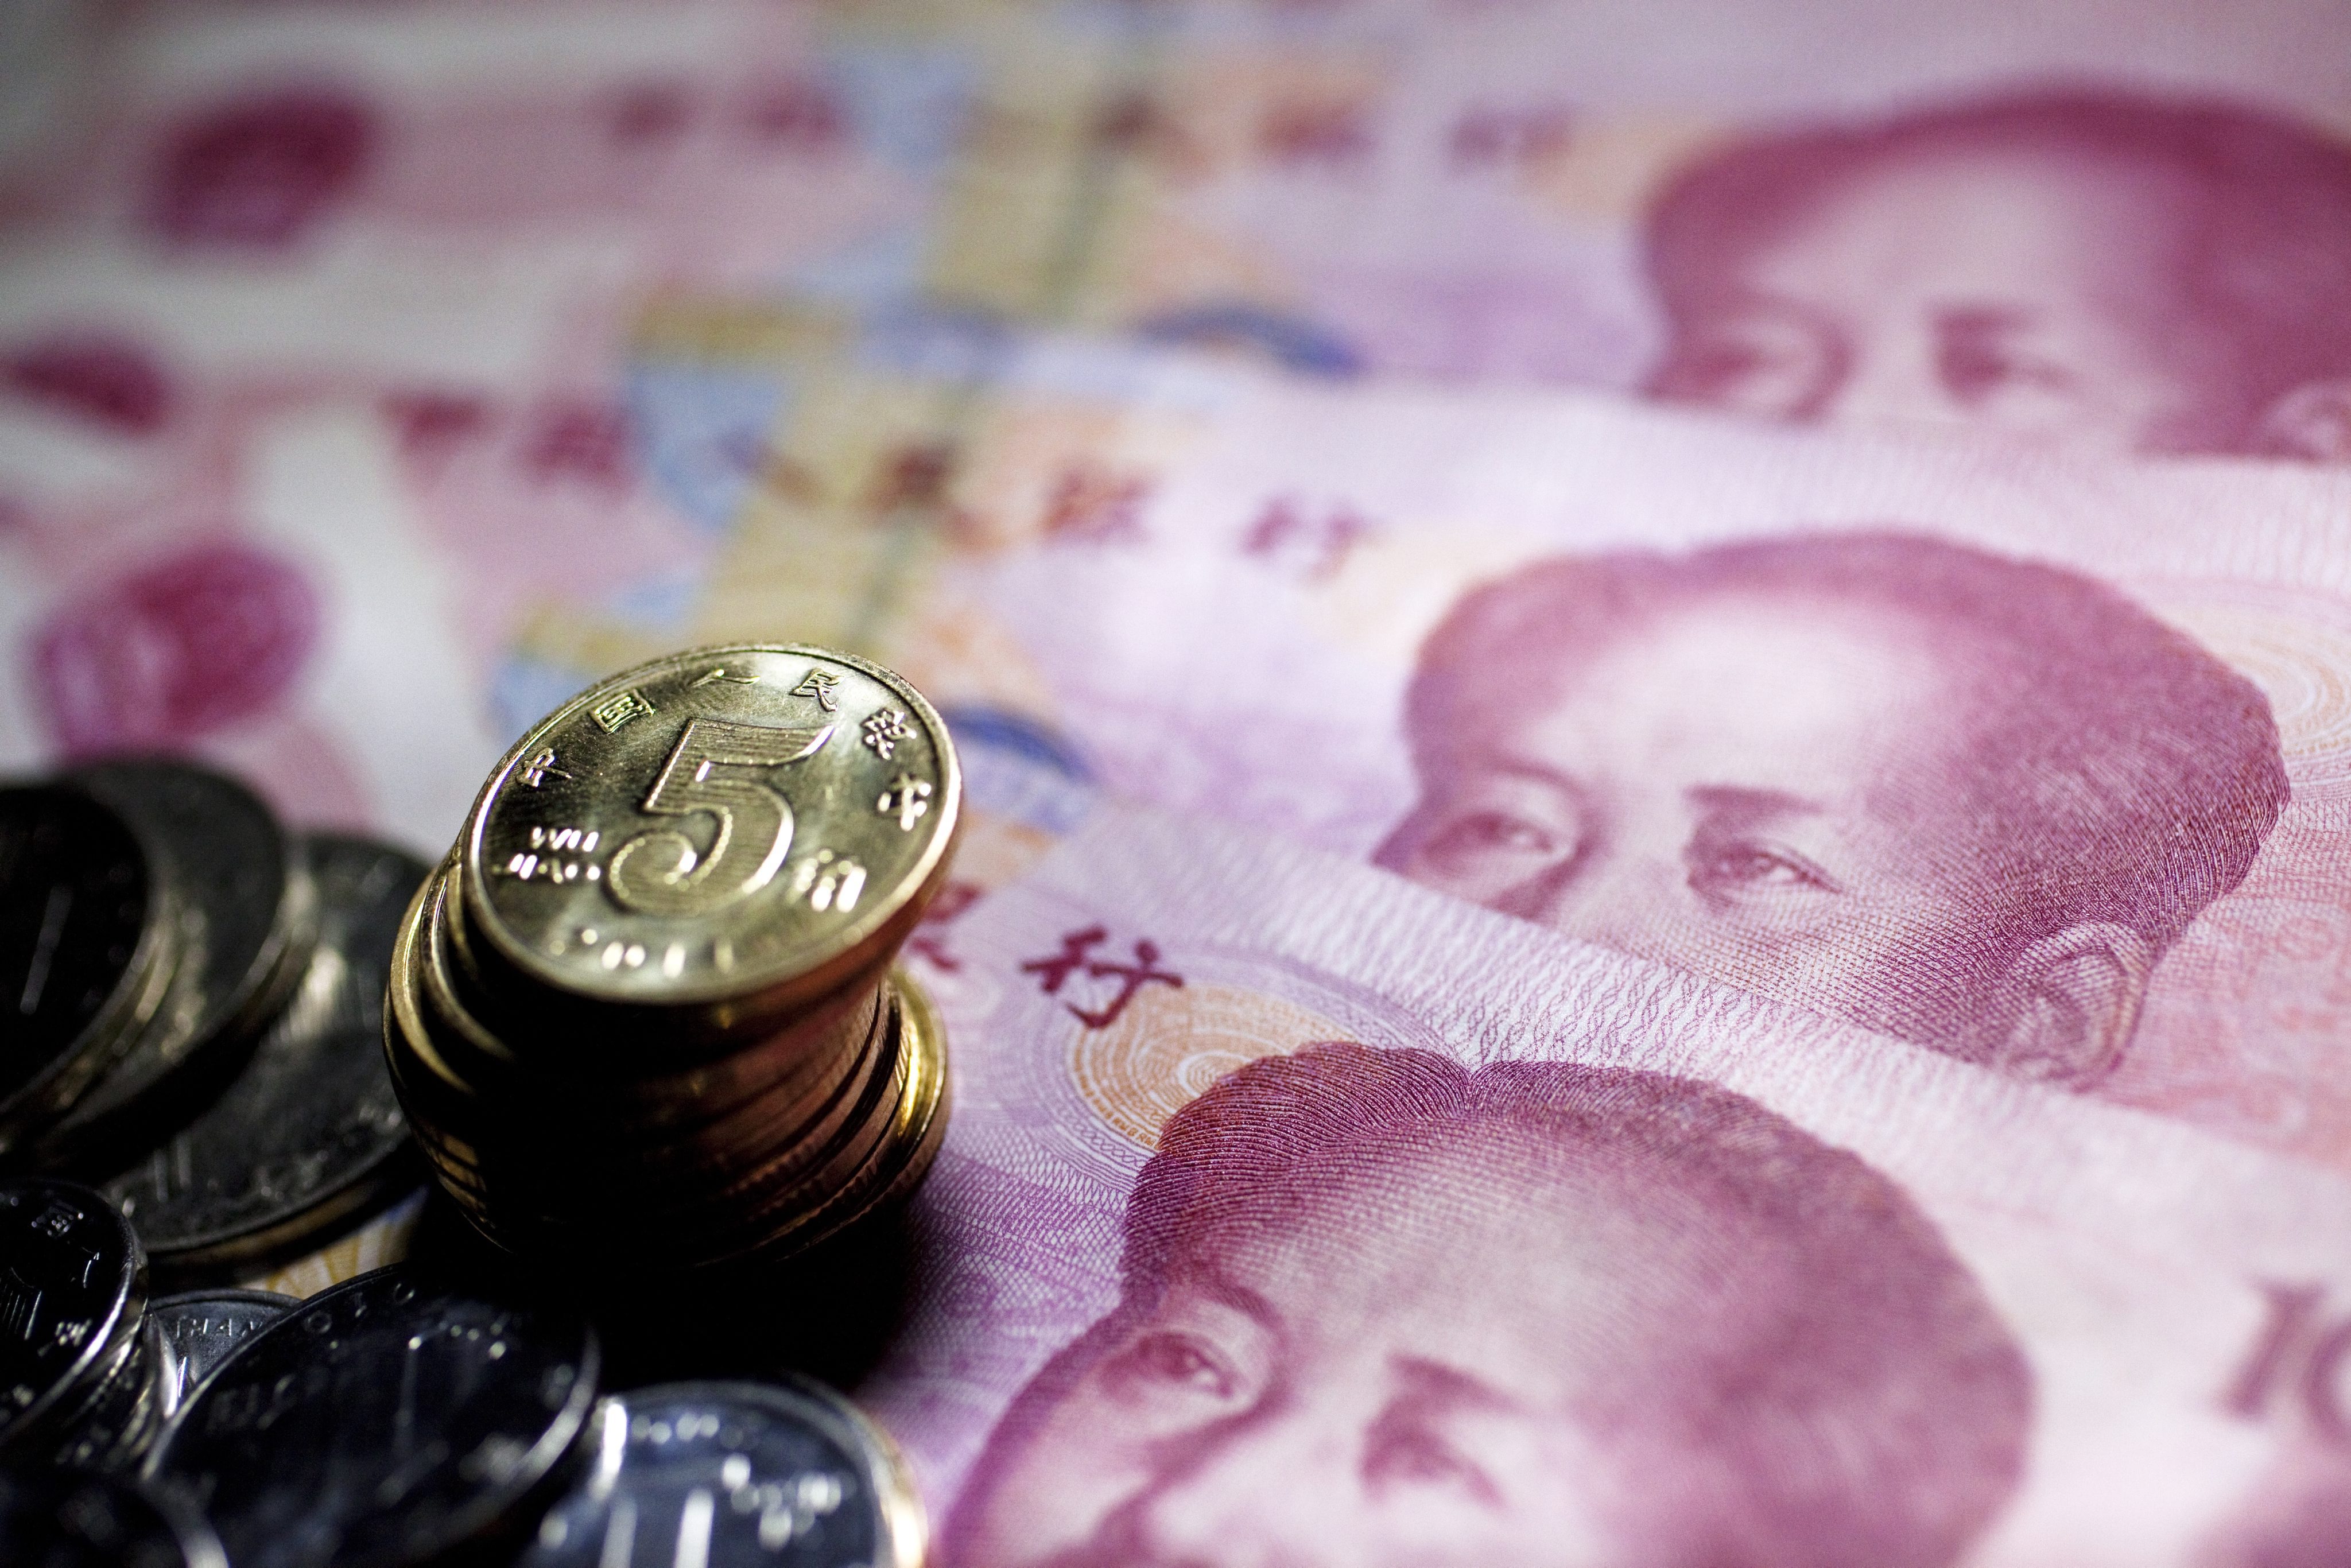 Chinese yuan notes and coins are shown as talk of currency wars due to the country's recent depreciation of the yuan is the last thing Beijing needs. Photo: EPA 